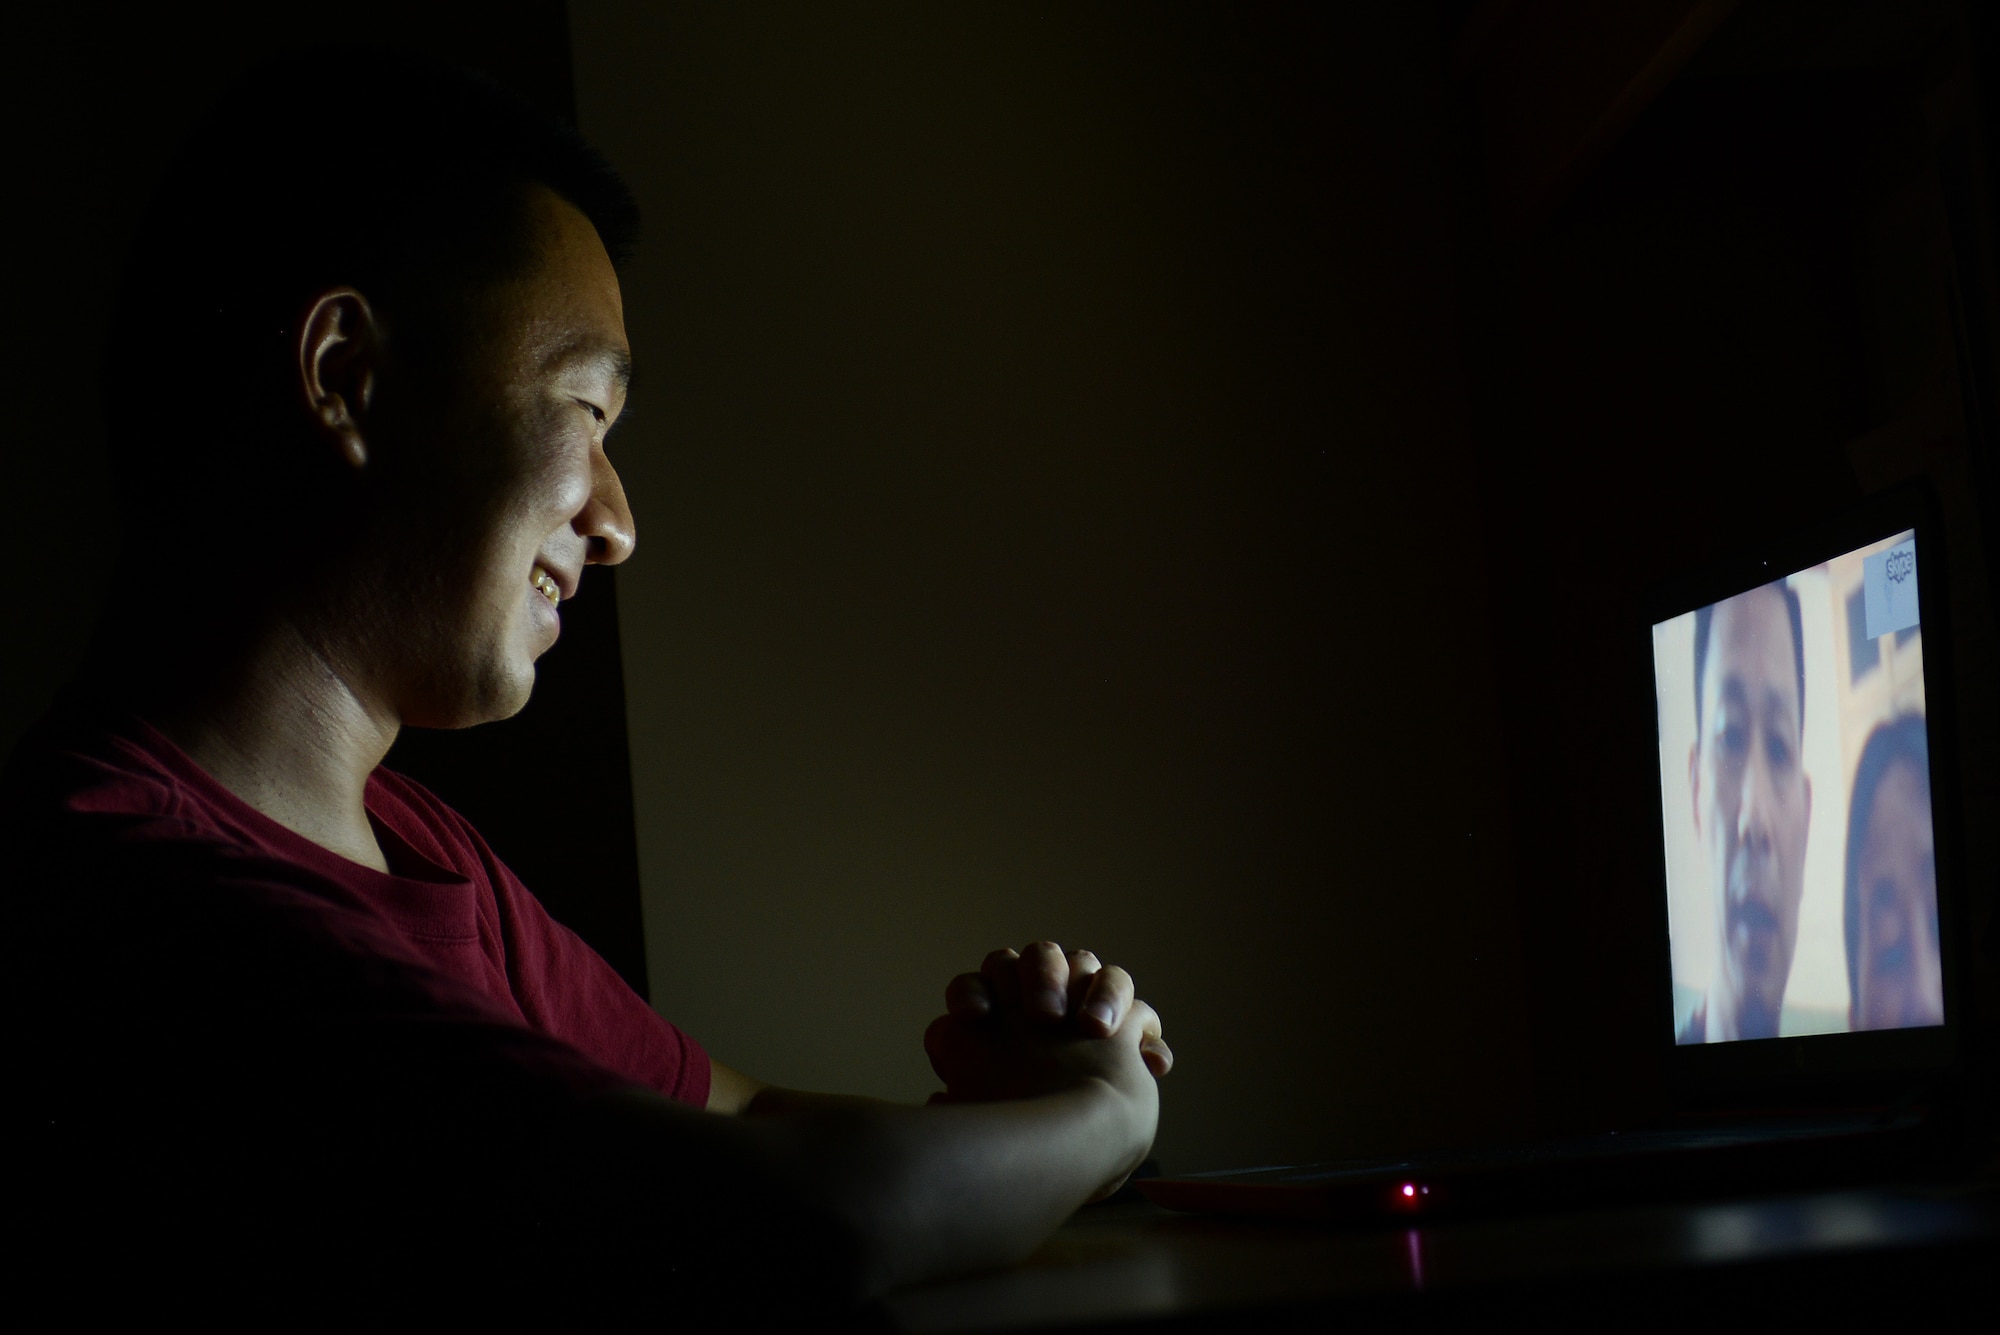 Airman 1st Class Bin Ma, a 20th Comptroller Squadron financial services technician, speaks with his parents through a video chat in his dorm room at Shaw Air Force Base, S.C., Aug. 2, 2015. Ma is hoping to soon visit his parents in China who he hasn’t seen in seven years and is anticipating bringing them to America as U.S. citizens in a few years. (U.S. Air Force photo/Senior Airman Diana M. Cossaboom)